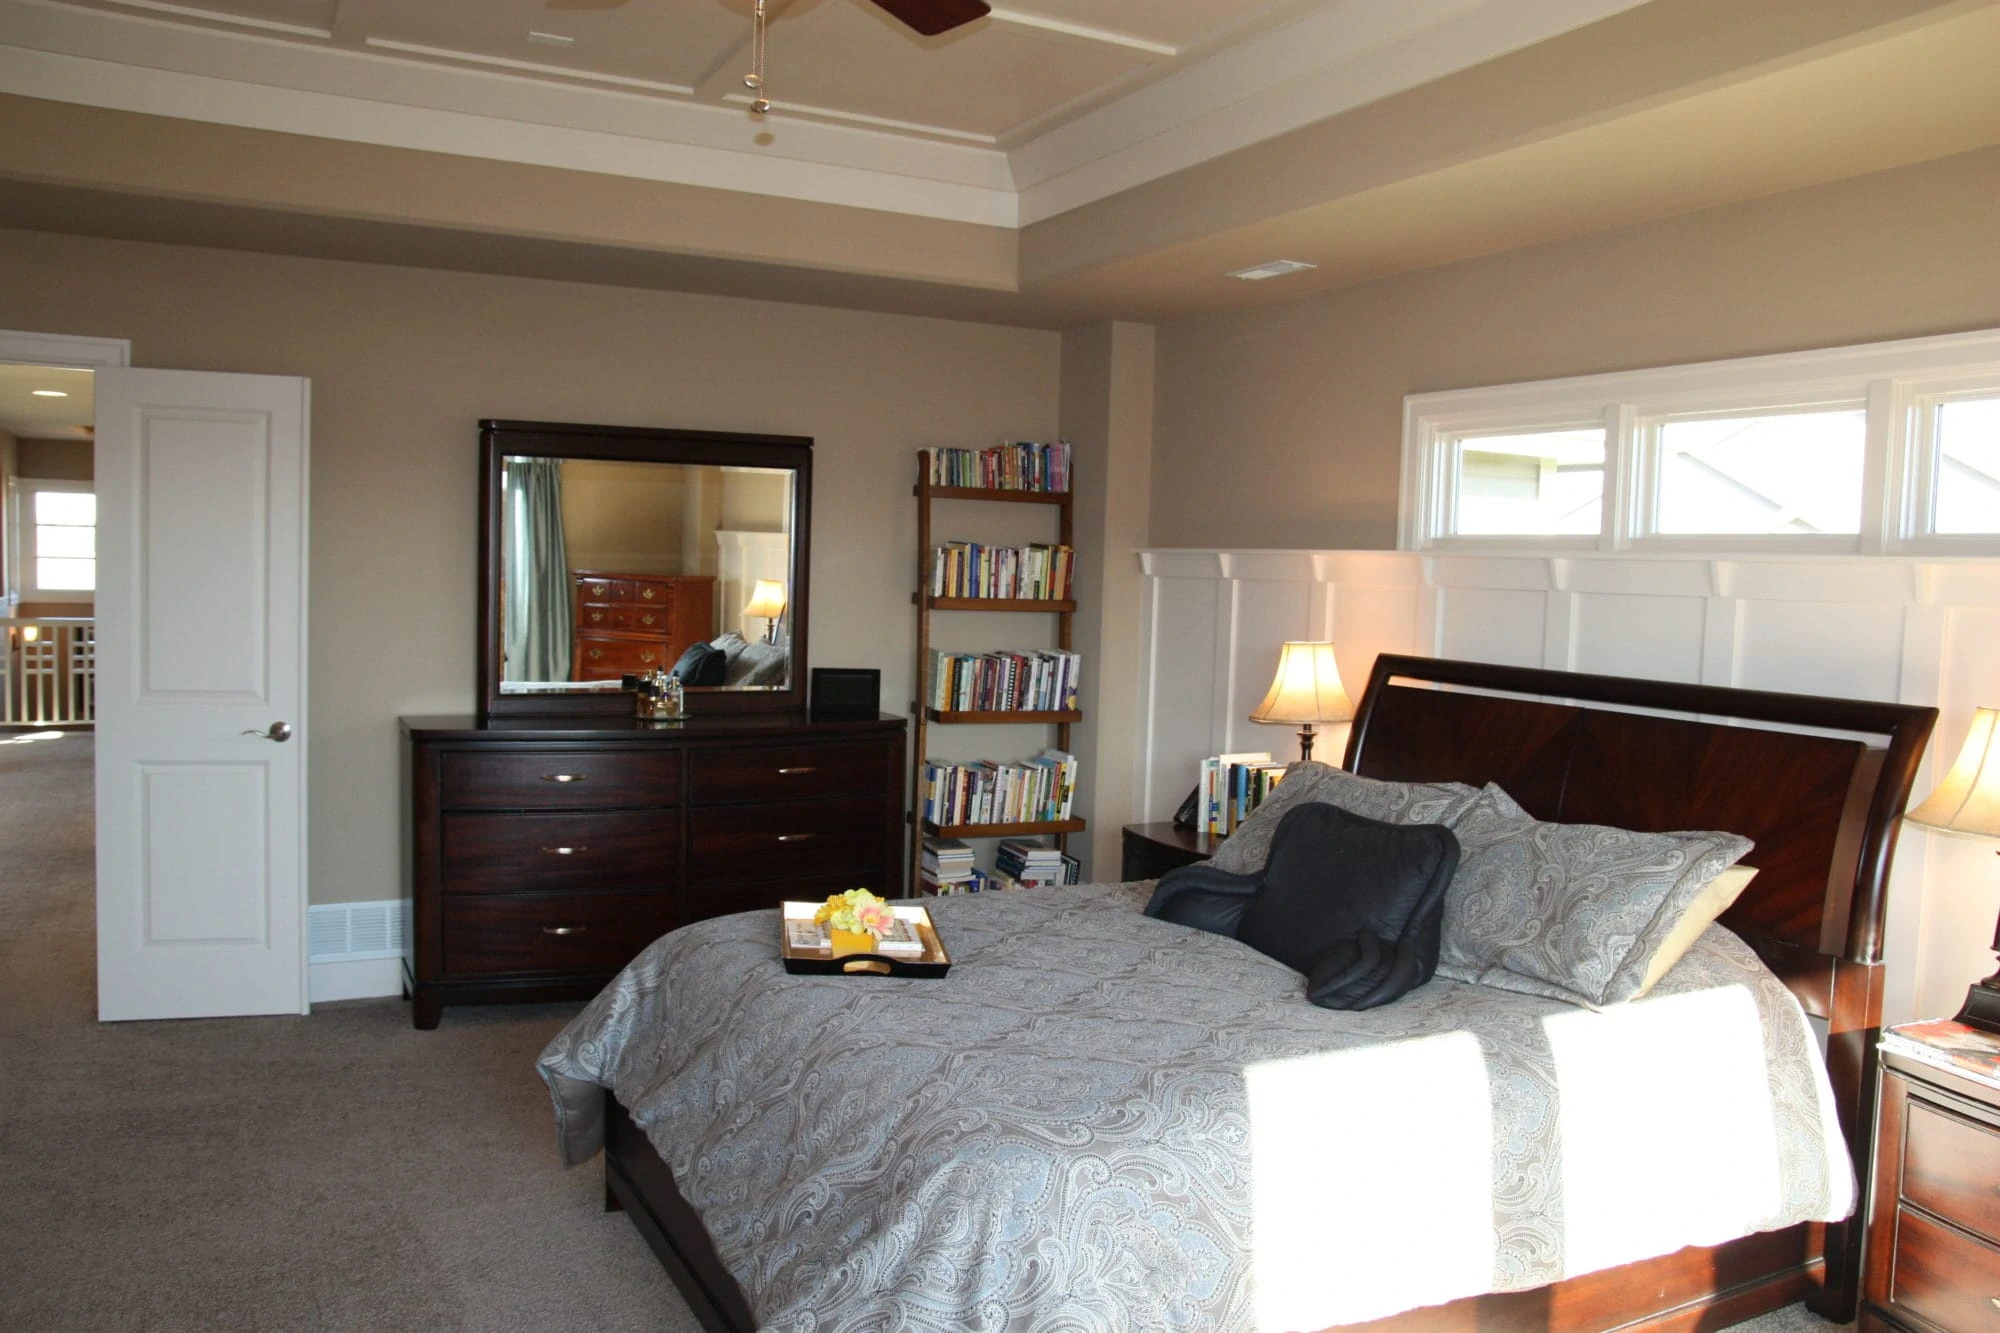 A large bedroom with a dark wood bed, dresser and door opened to the hallway.